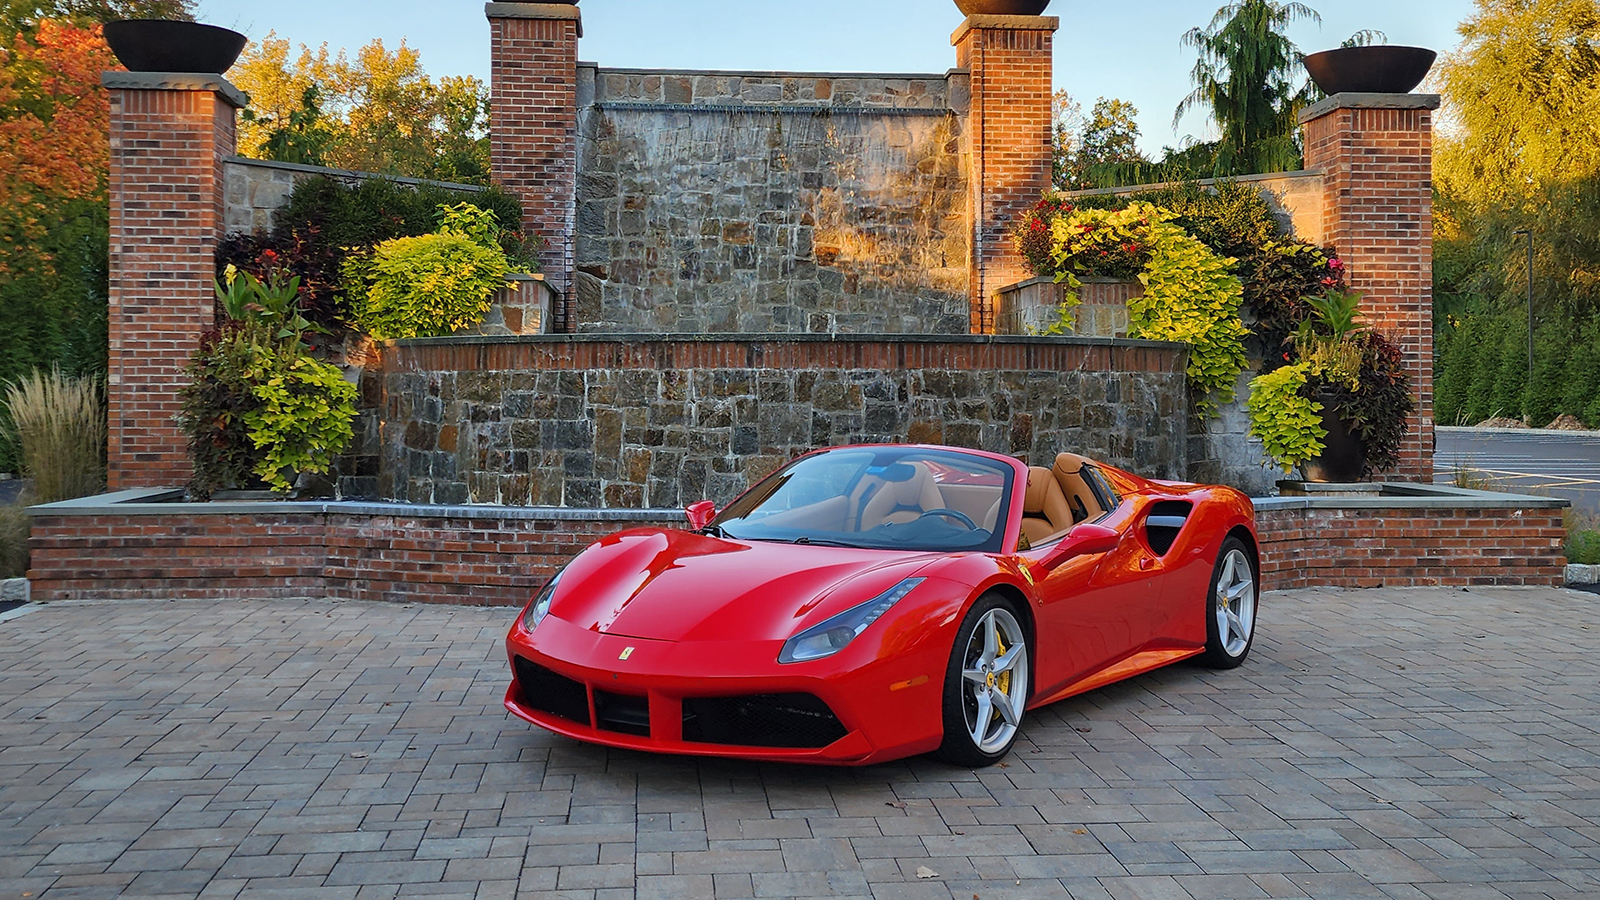 Image of a 2017 Ferrari 488 Spider in front of a brick structure.